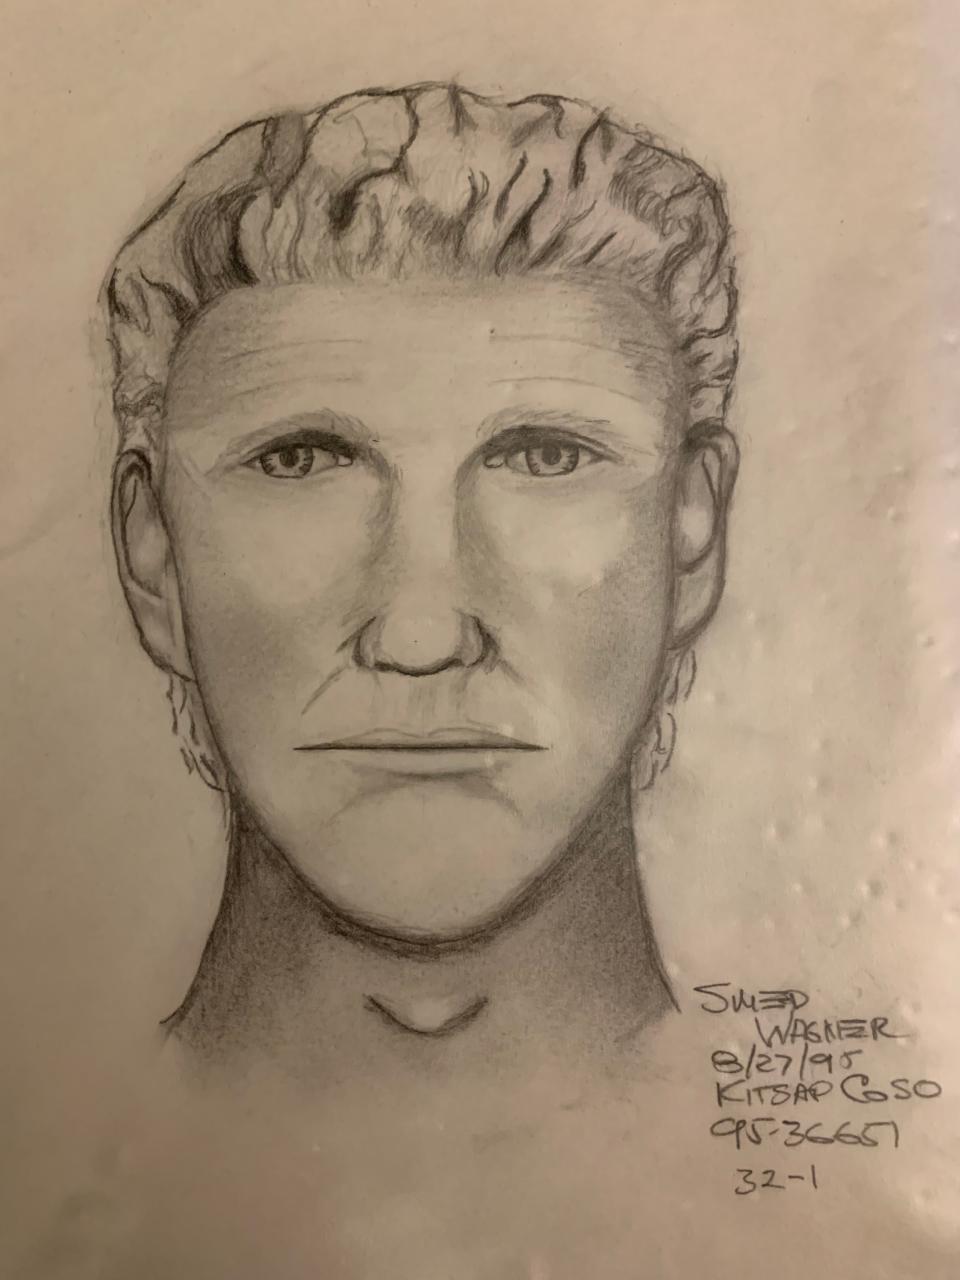 A sketch of the suspect was drawn based on a witness' description of the last known person seen to be with Patricia Lorraine Barnes.